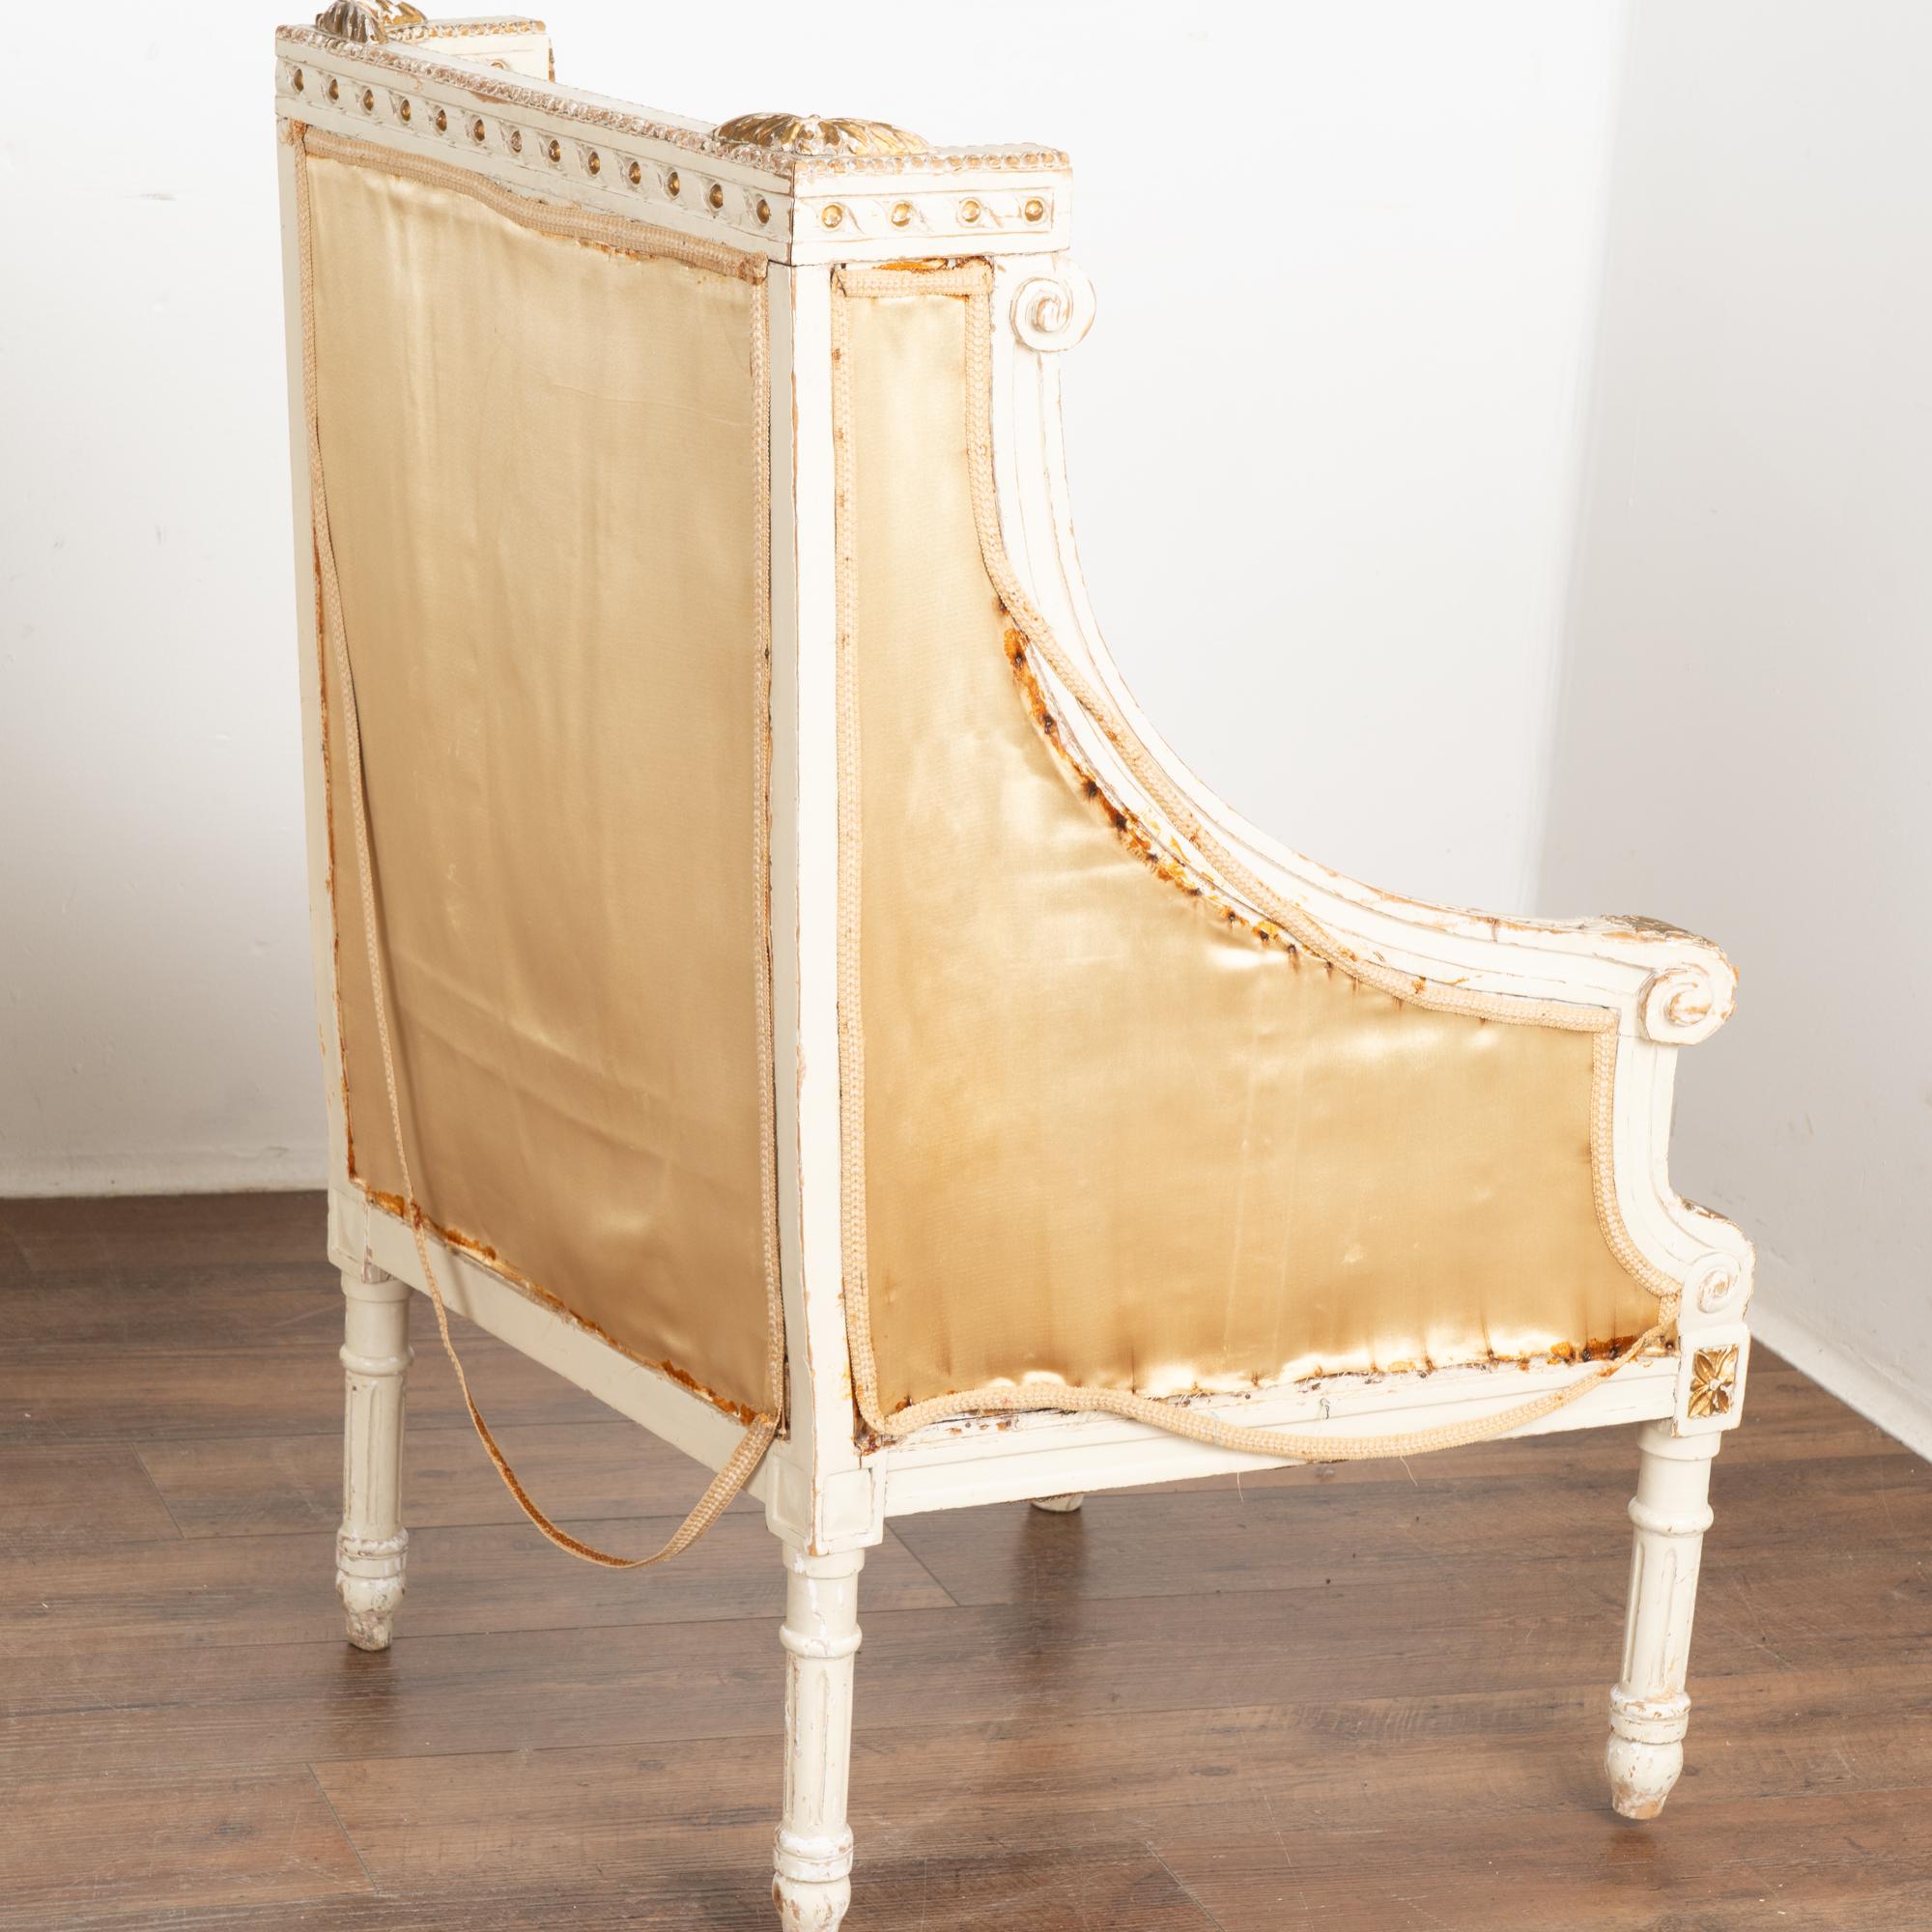 Set of Three White and Gold Arm Chairs, France circa 1890 For Sale 5